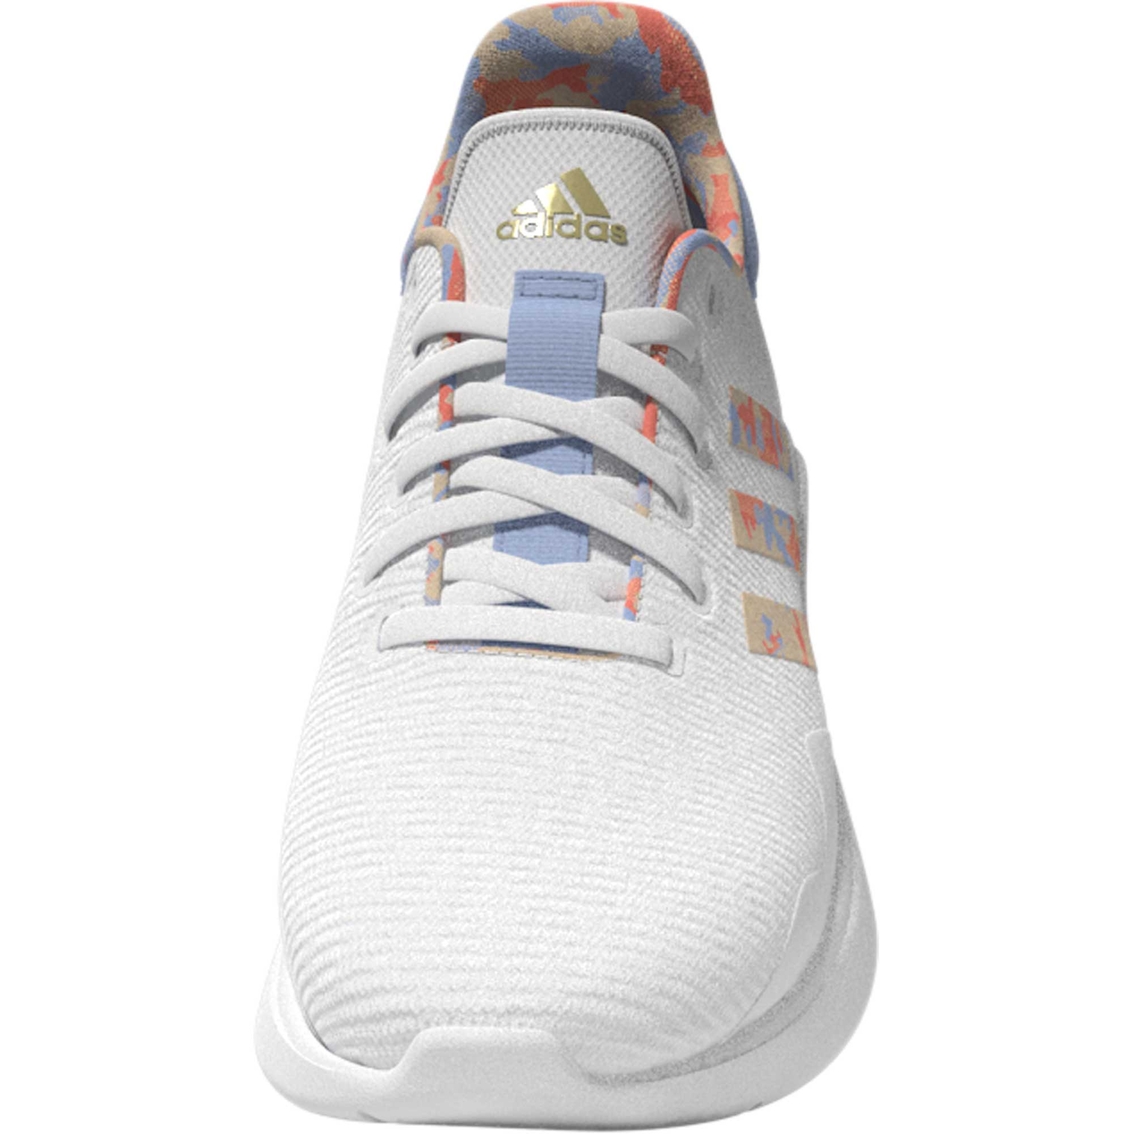 Adidas Women's Puremotion 2.0 Sneakers - Image 5 of 10